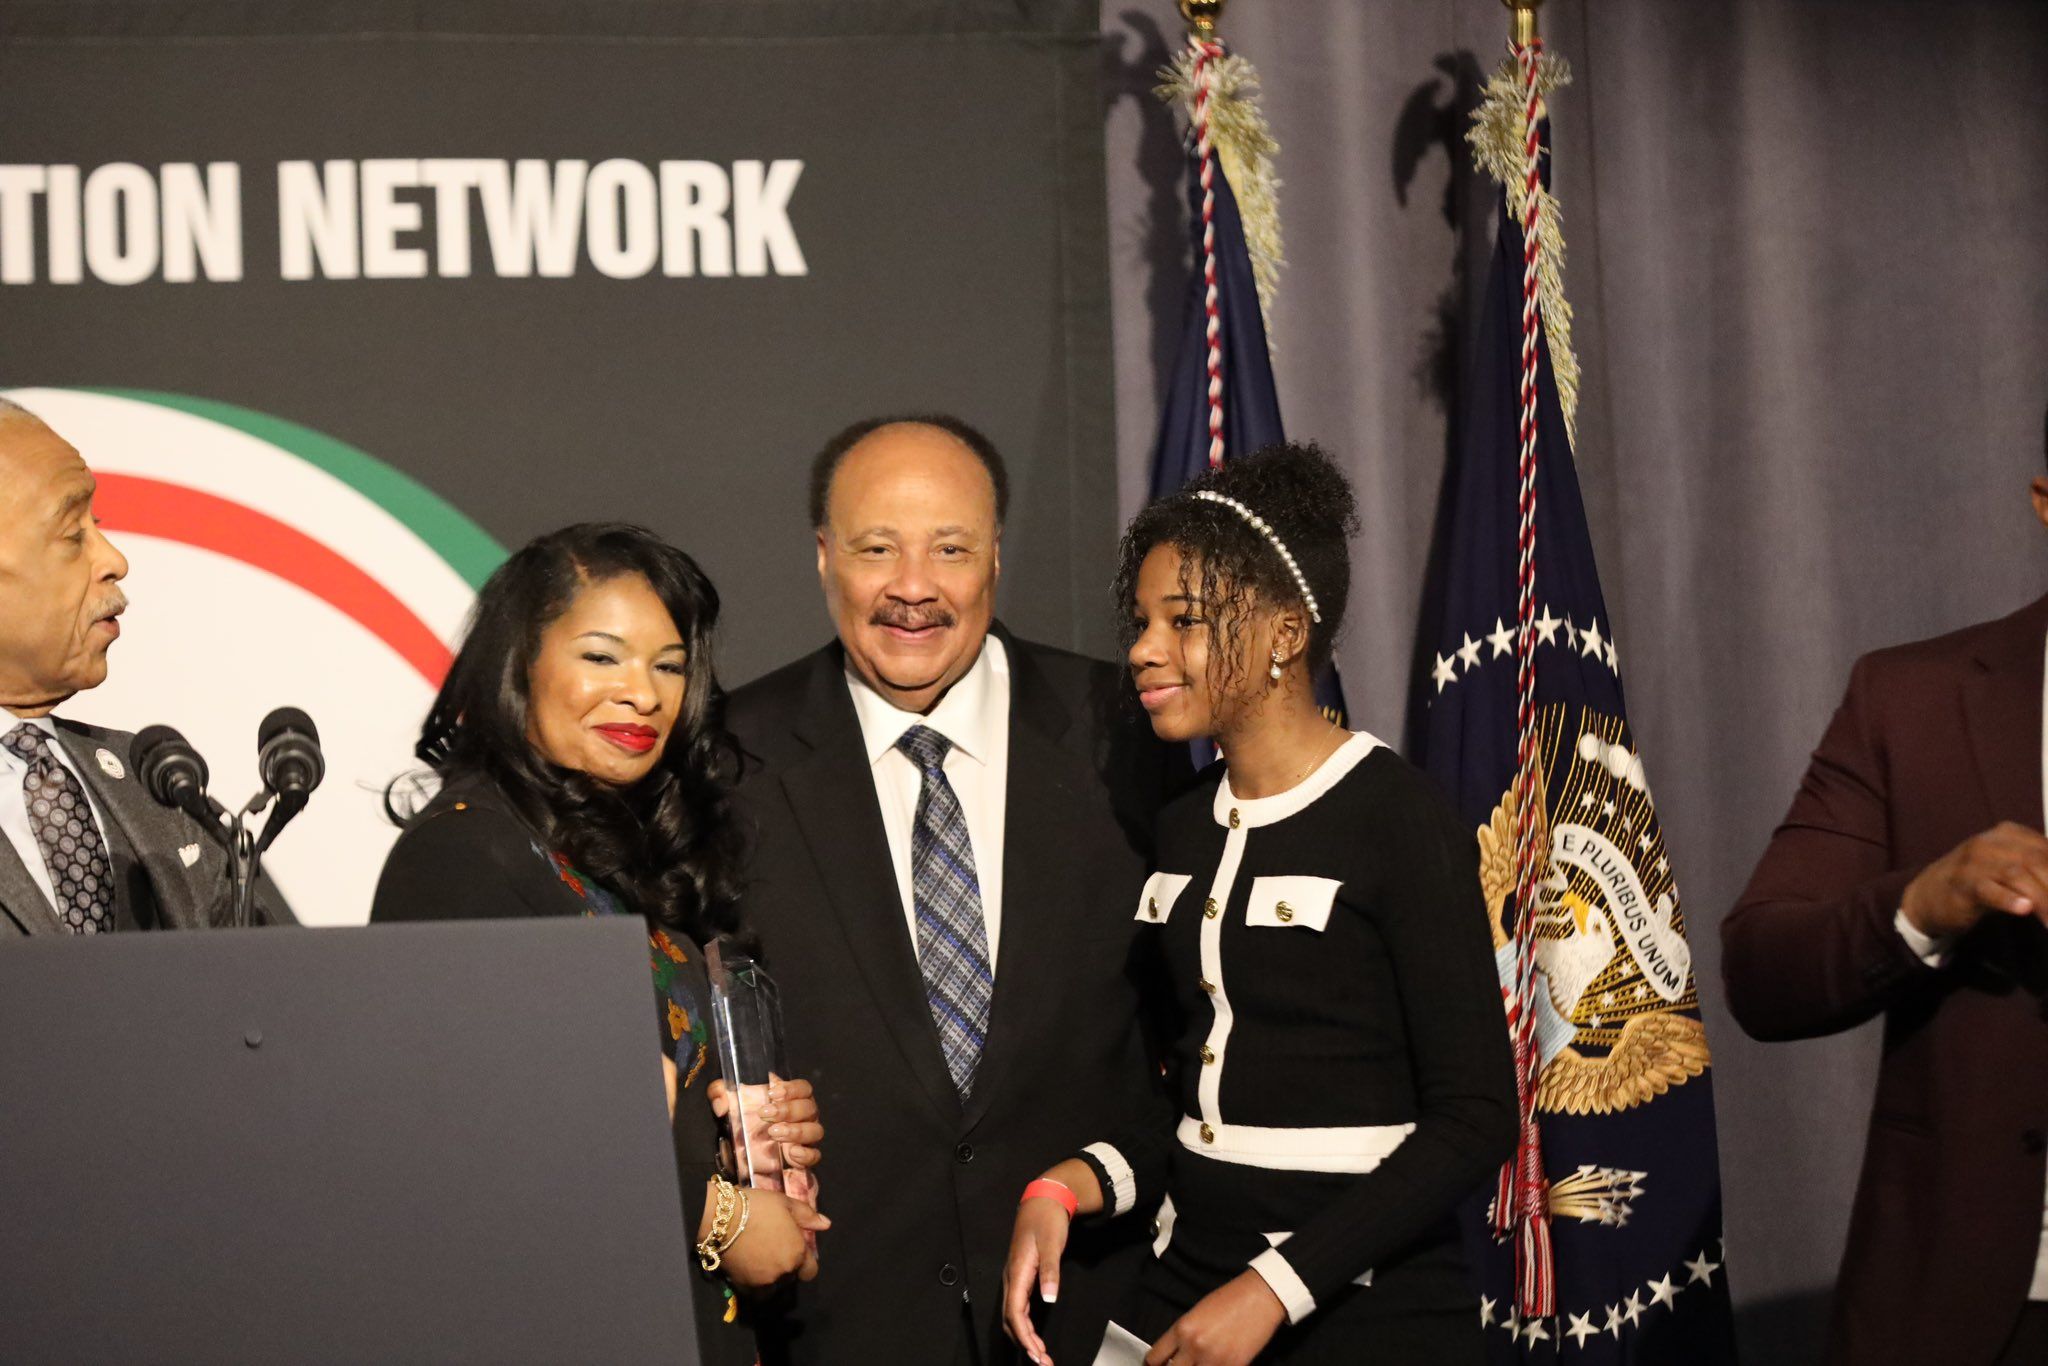 Who is Arndrea Waters King, Martin Luther King III’s wife?